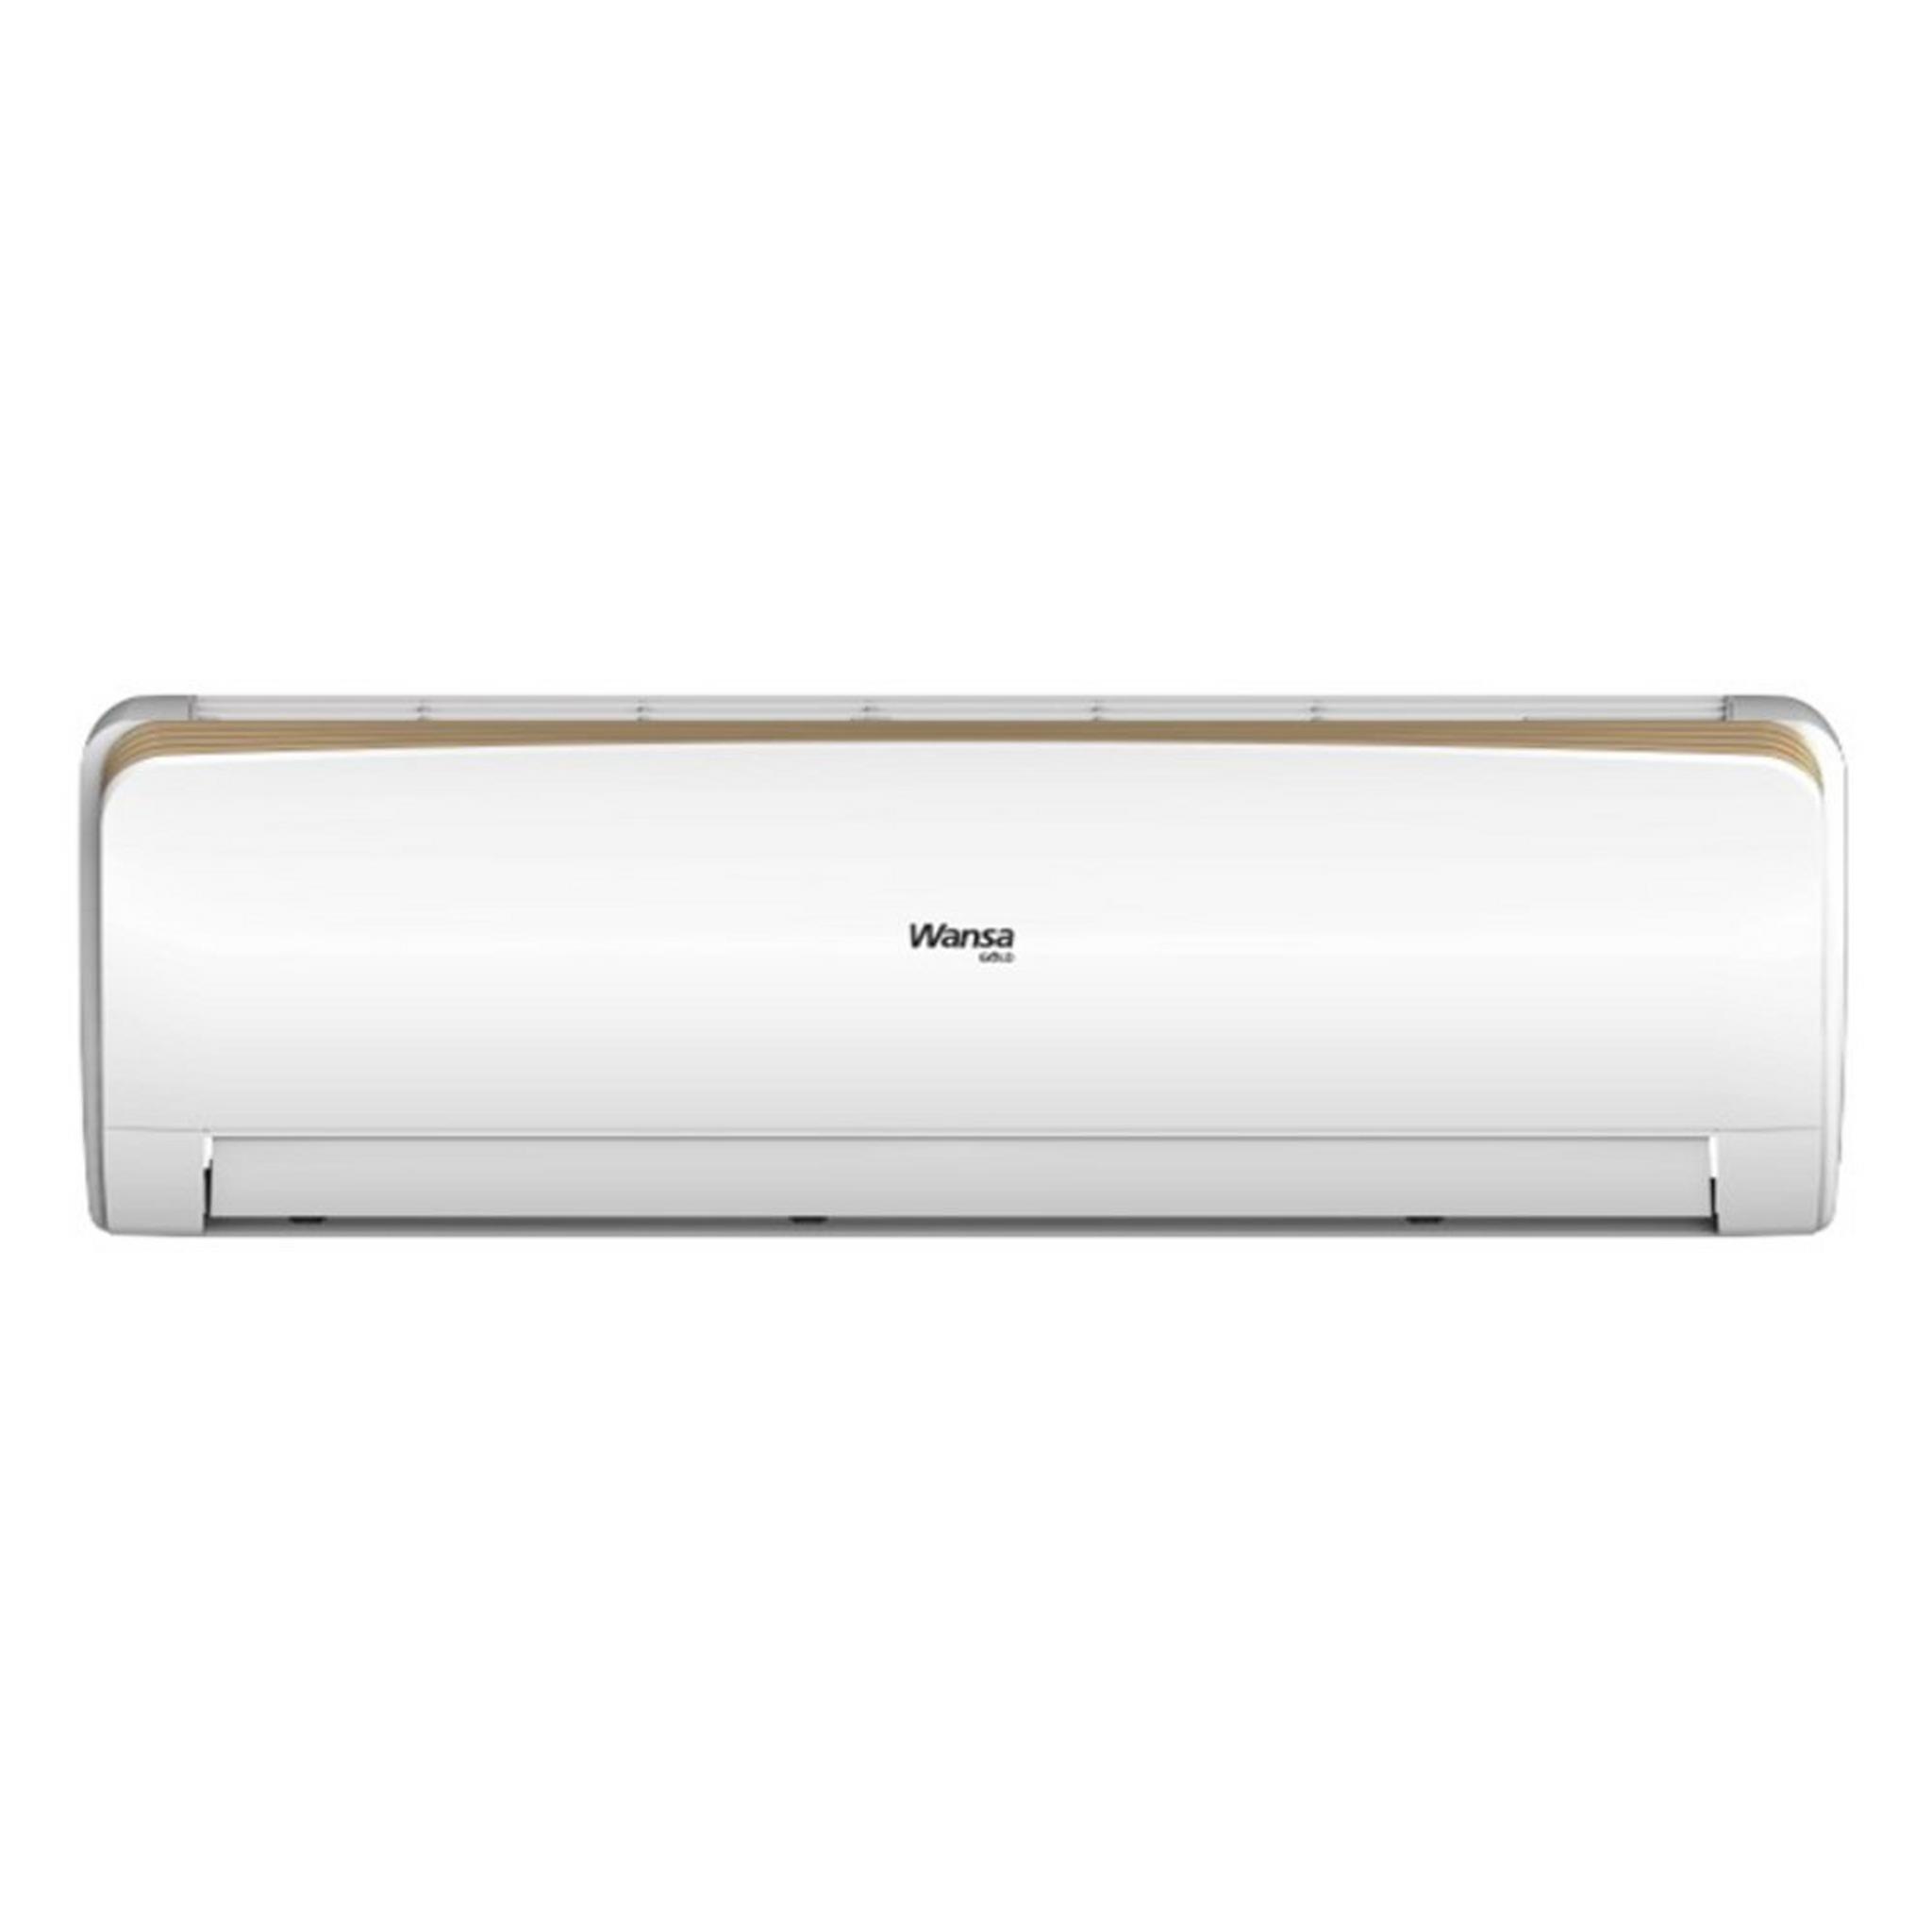 Wansa Gold Split AC, 25250 BTU, Cooling Only (WSUC25CAXGS-23) - White